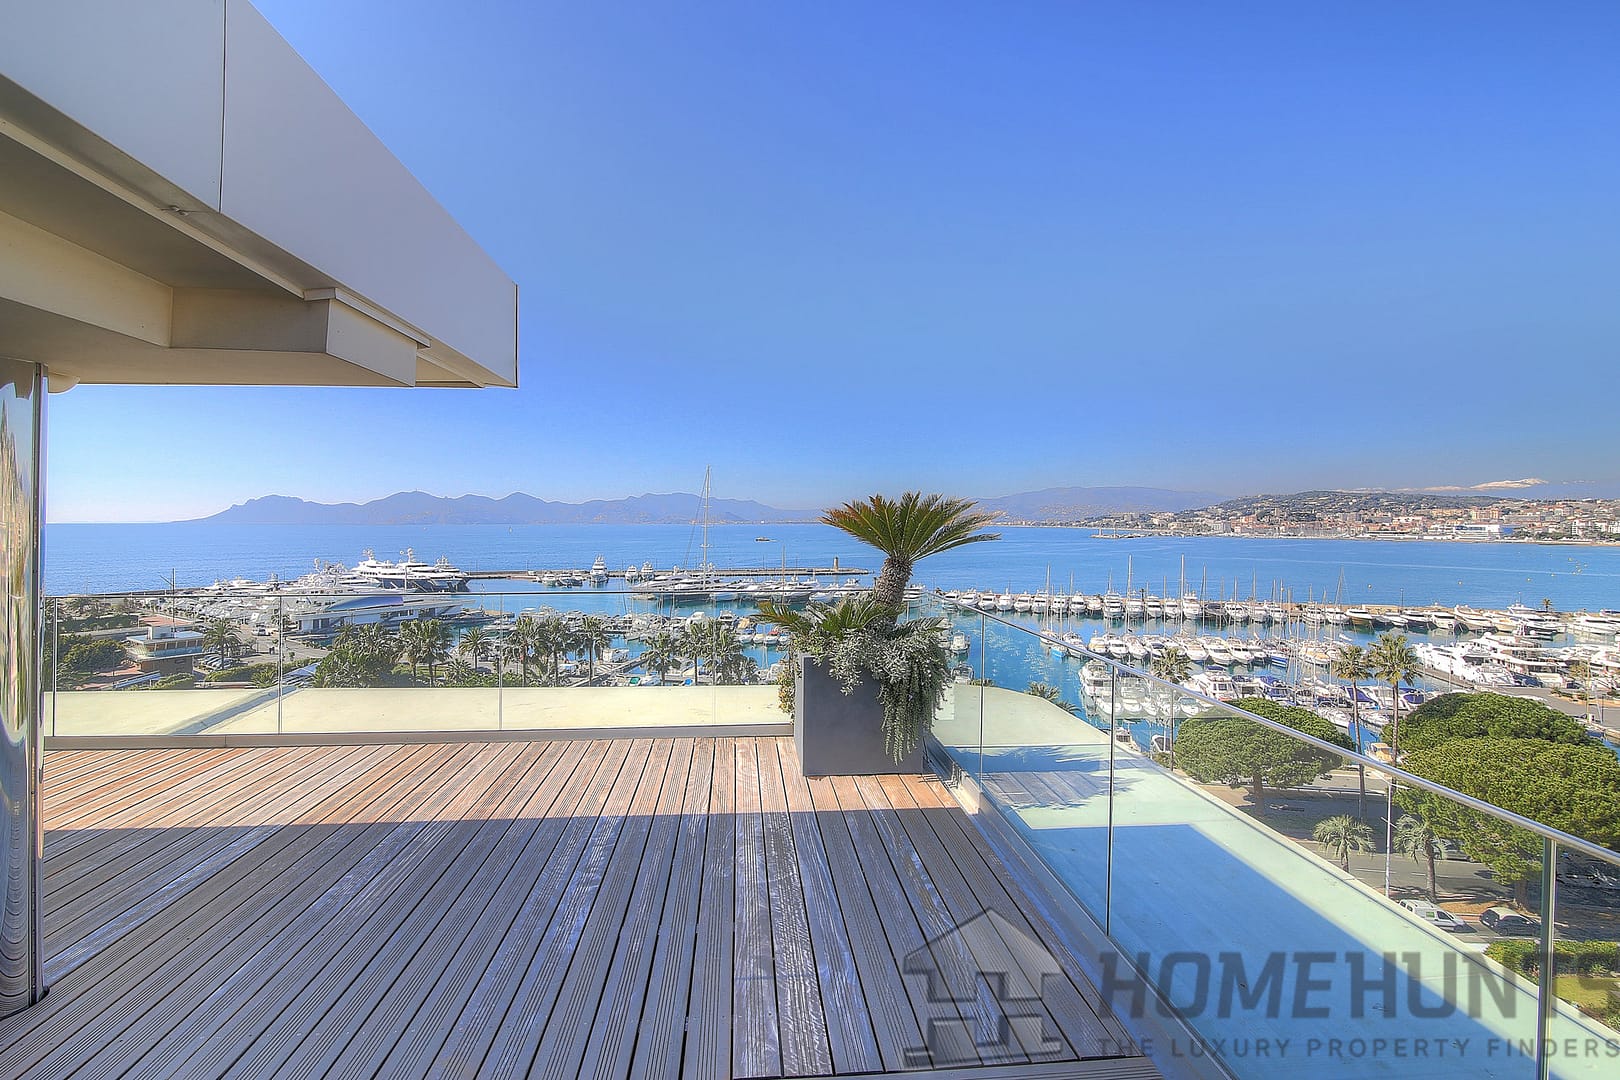 5 Bedroom Apartment in Cannes 10